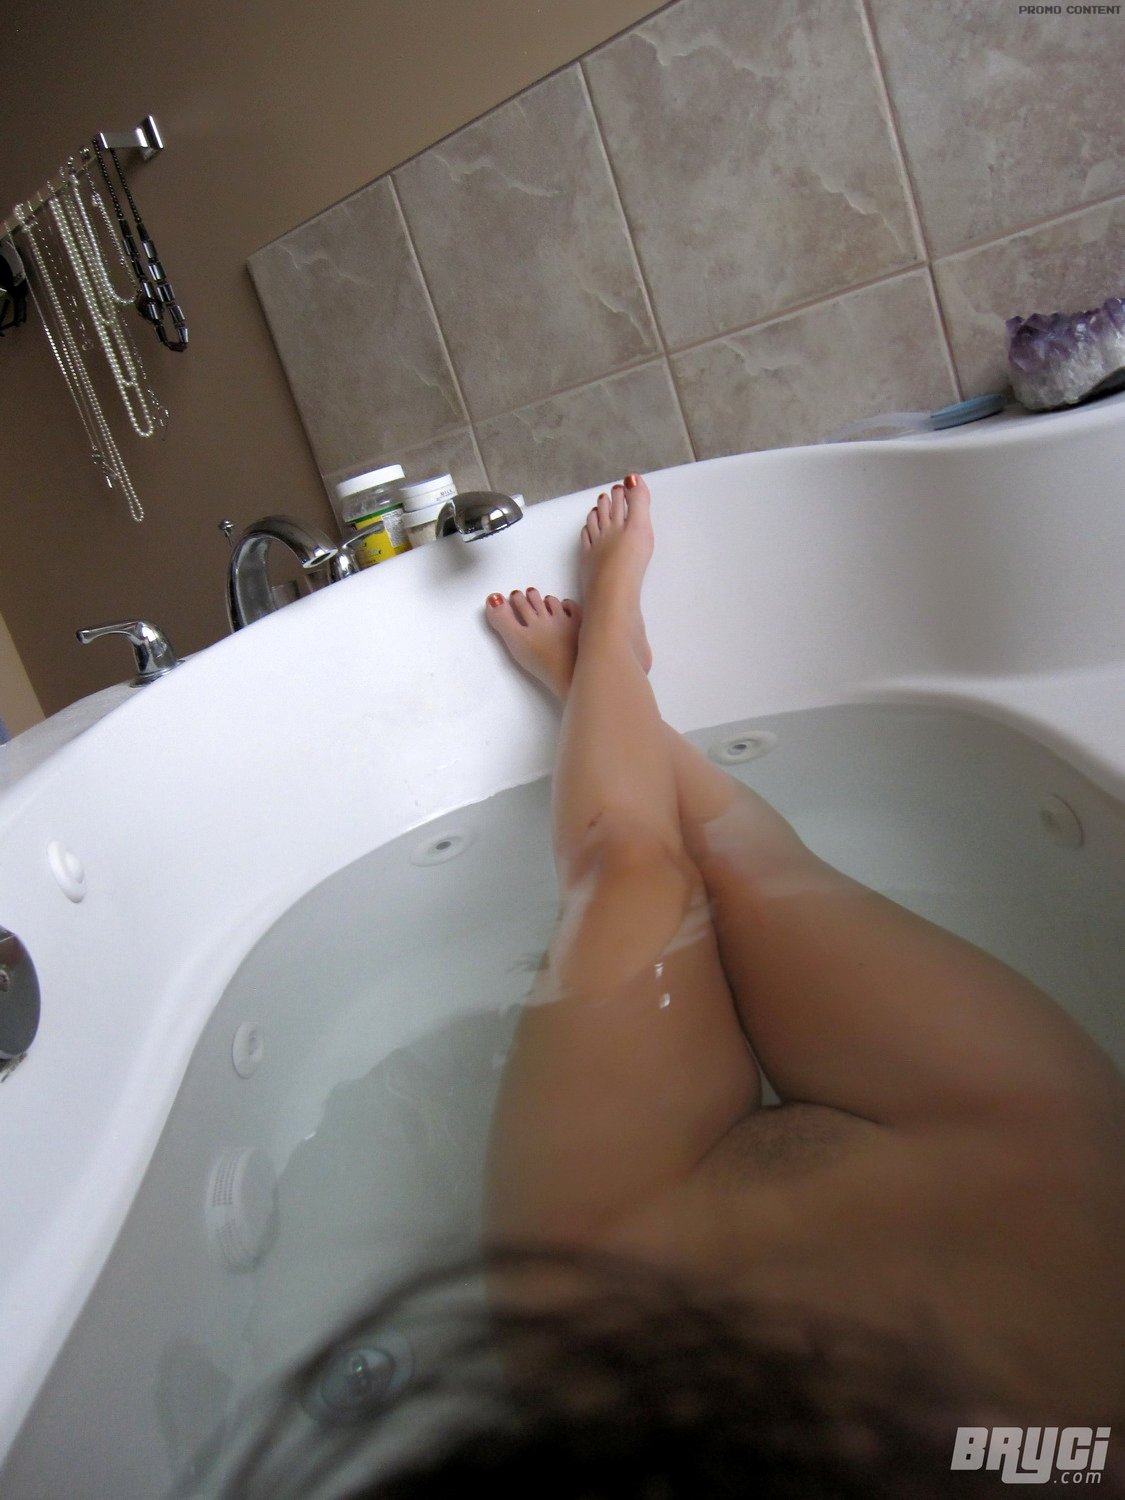 Nude Bath Feet - Bryci takes pics of herself naked in the bathtub! 58485 - Good Sex Porn